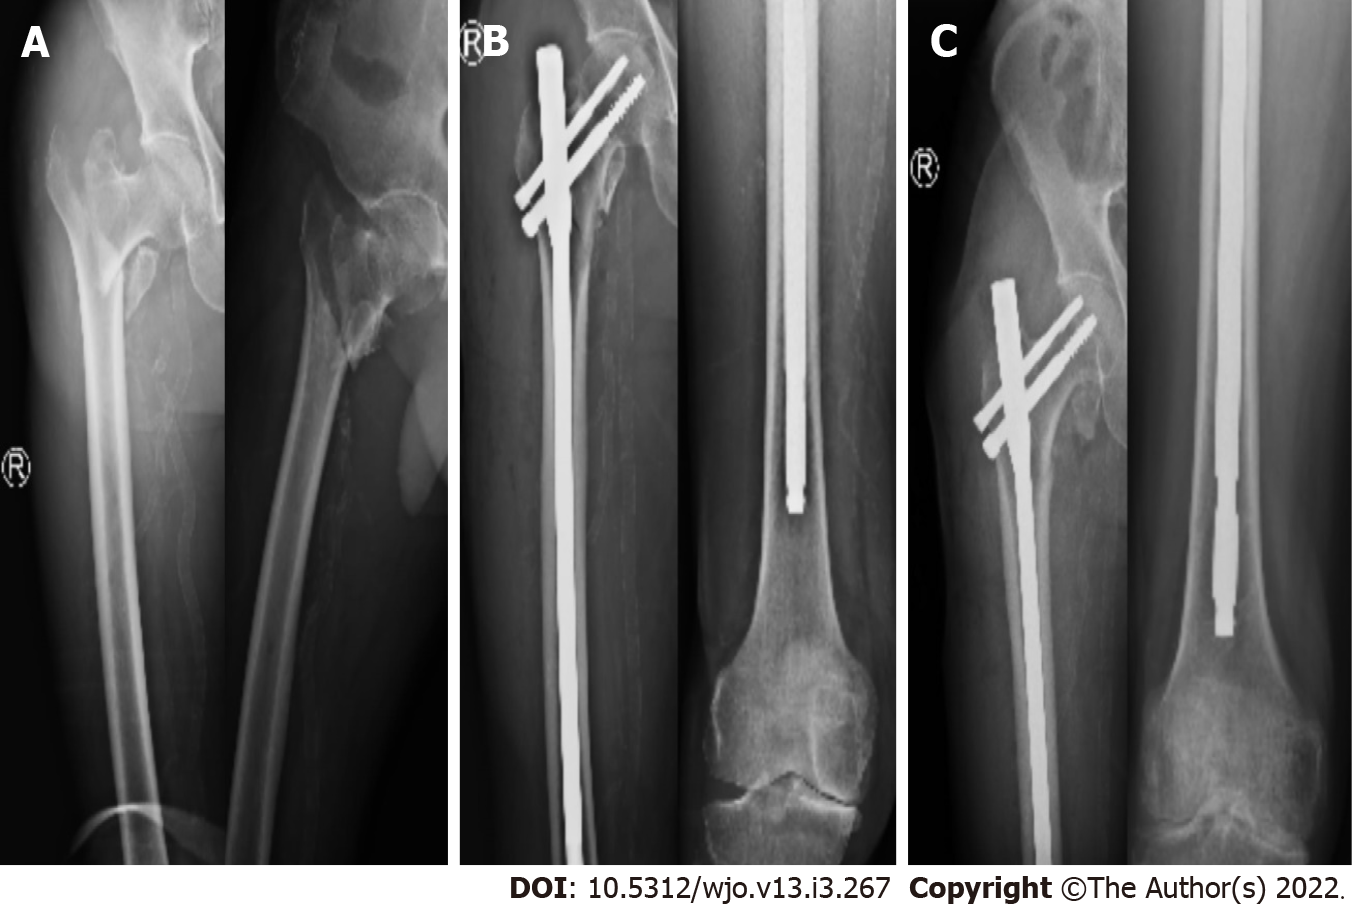 Retrograde Humeral Nail for treatment of an isolated femoral shaft fracture  in a patient with Mucolipidosis Type IV: Surgical decision making and  outcome